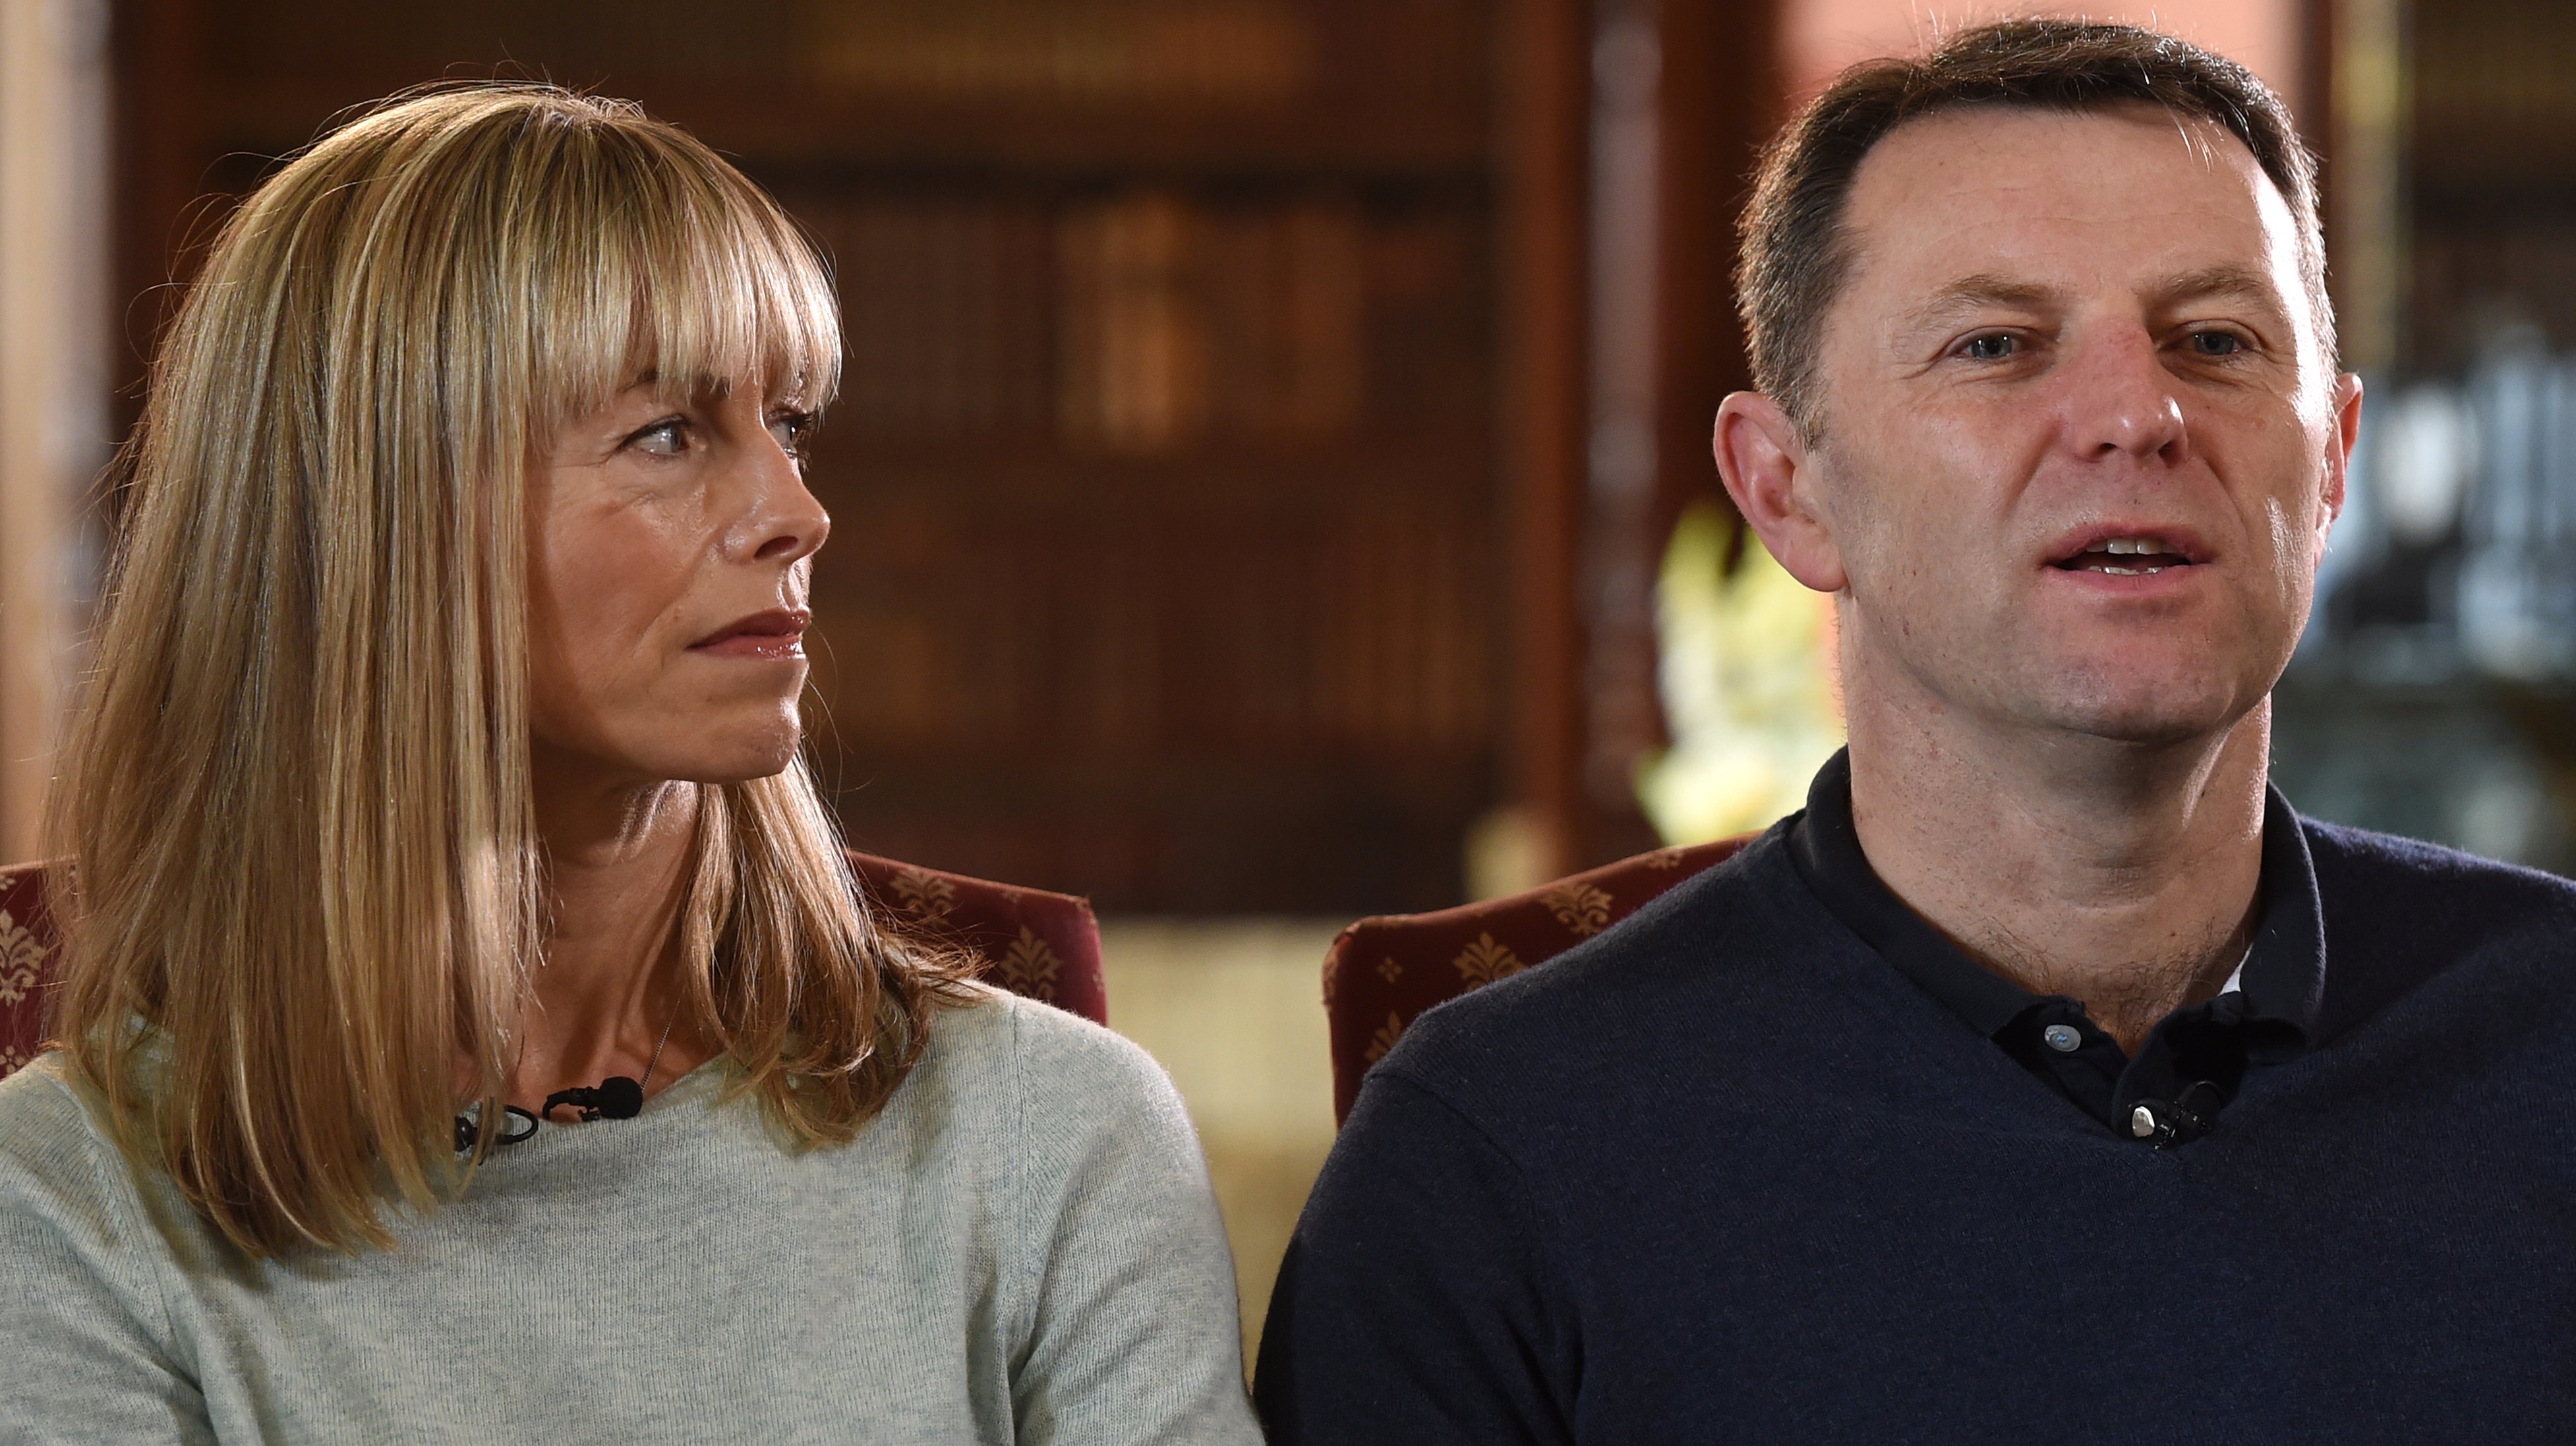 Kate And Gerry McCann Give An Interview To The BBC To Mark 10 Year Anniversary of Disappearance Of Their Daughter Madeleine McCann